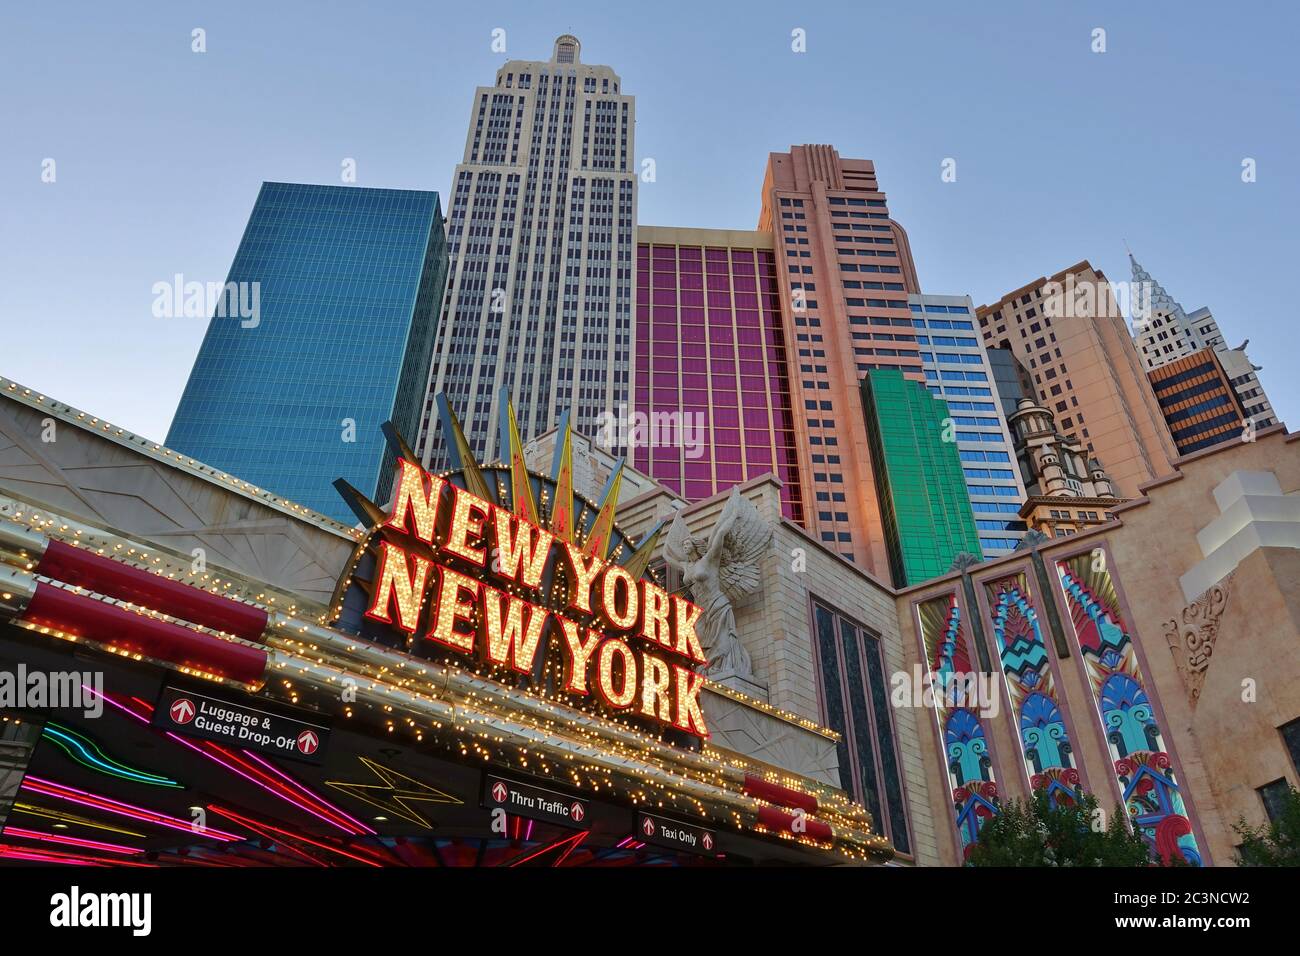 LAS VEGAS, NV -6 JUN 2020- Located on the Strip in downtown Las Vegas, United States, the New York New York Hotel and Casino includes replica of famou Stock Photo